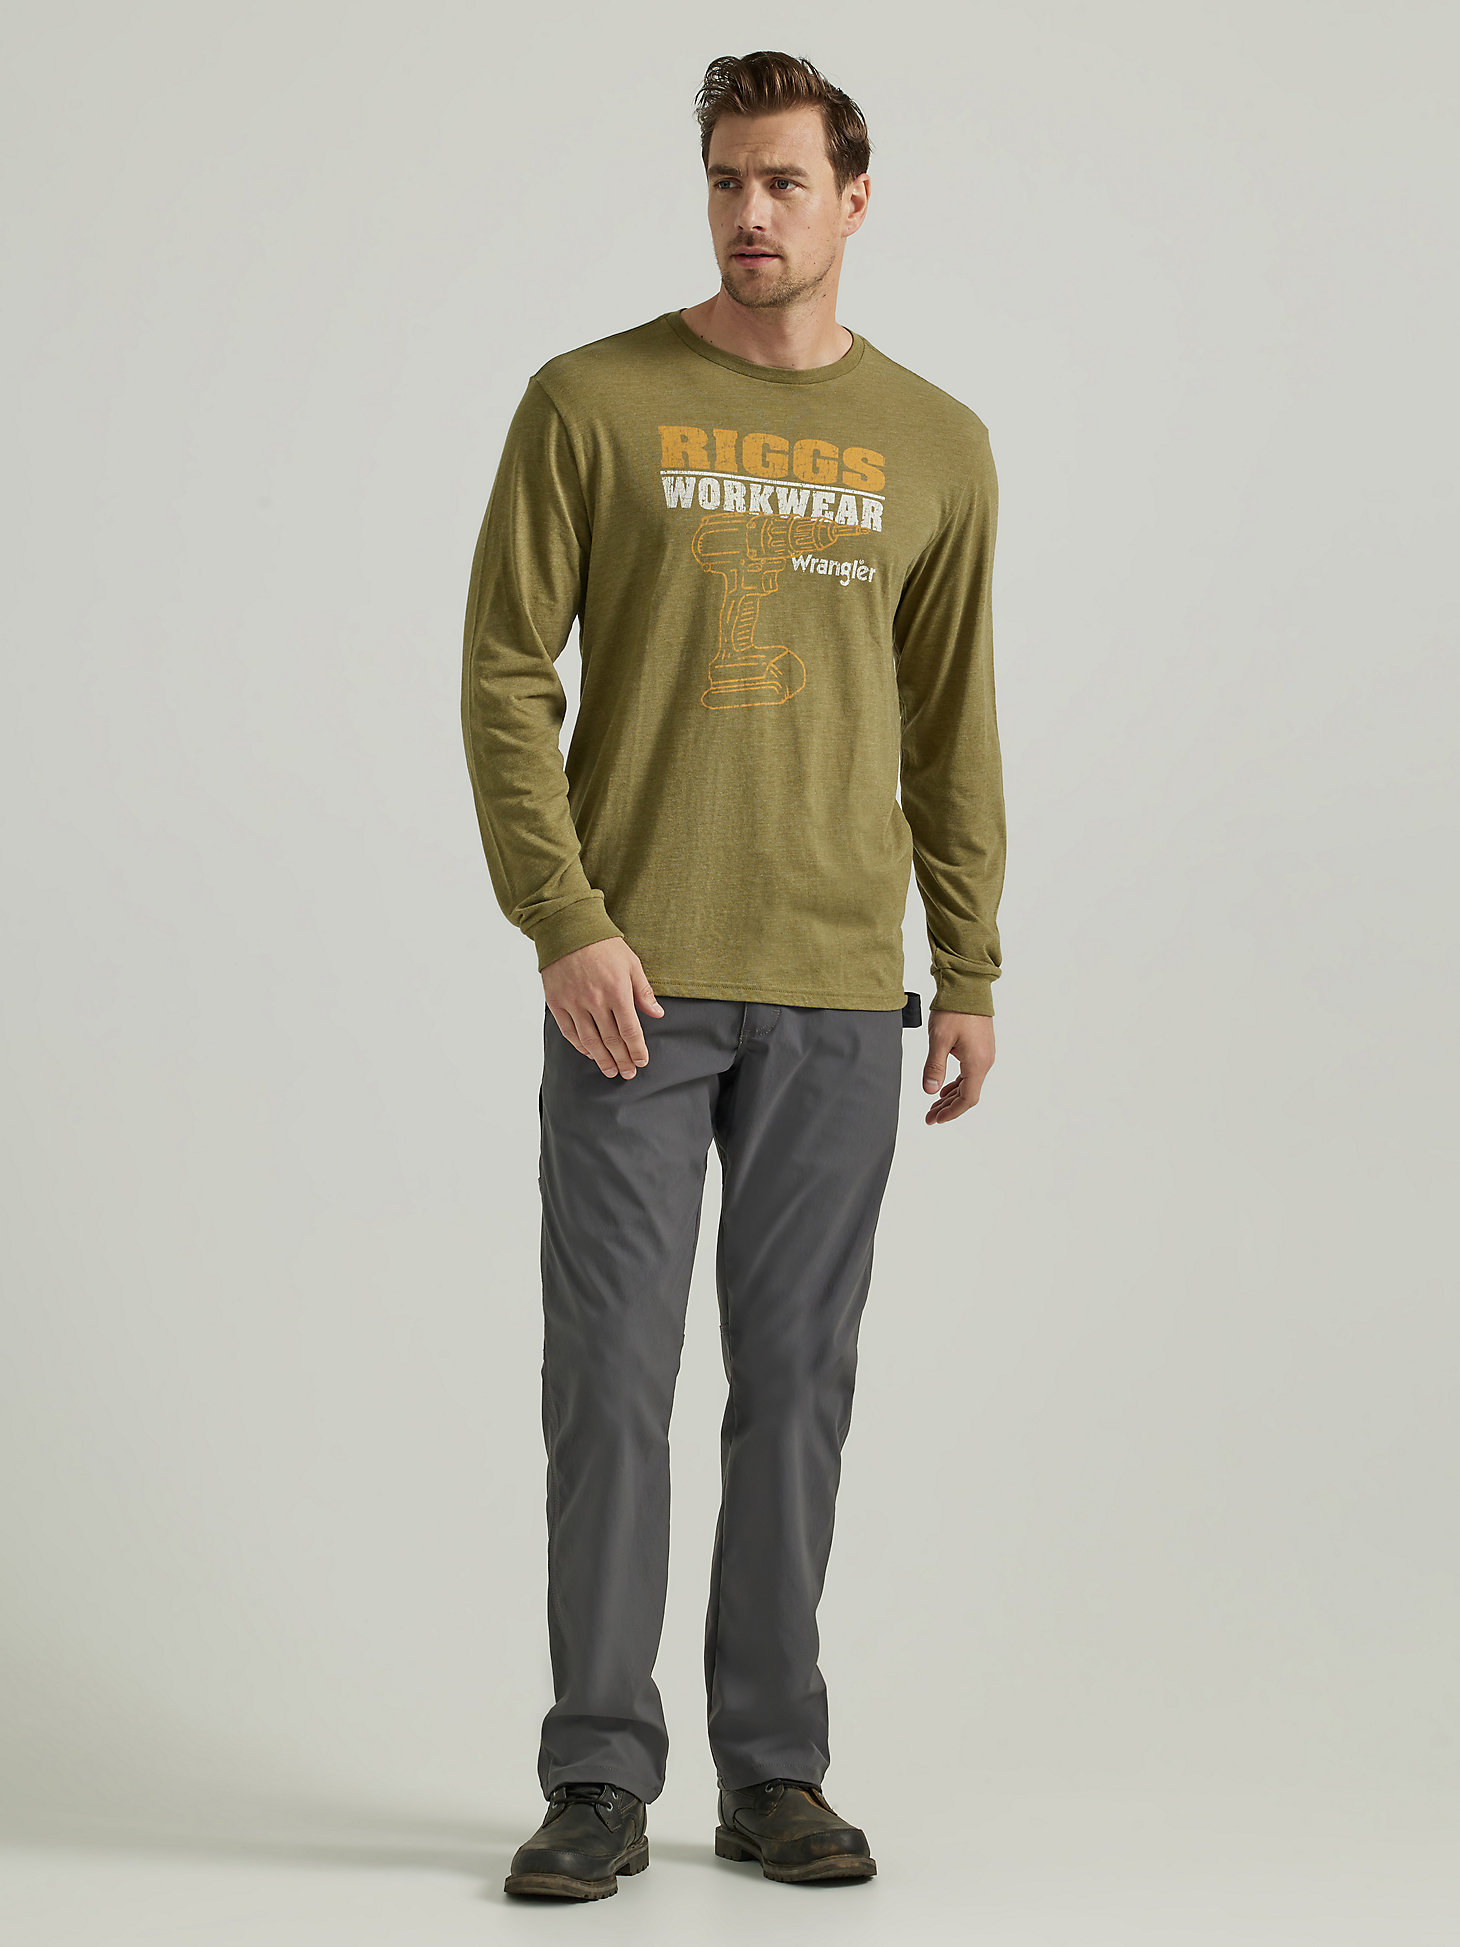 Wrangler® RIGGS Workwear® Relaxed Front Long Sleeve Graphic T-Shirt in Capulet Olive alternative view 1